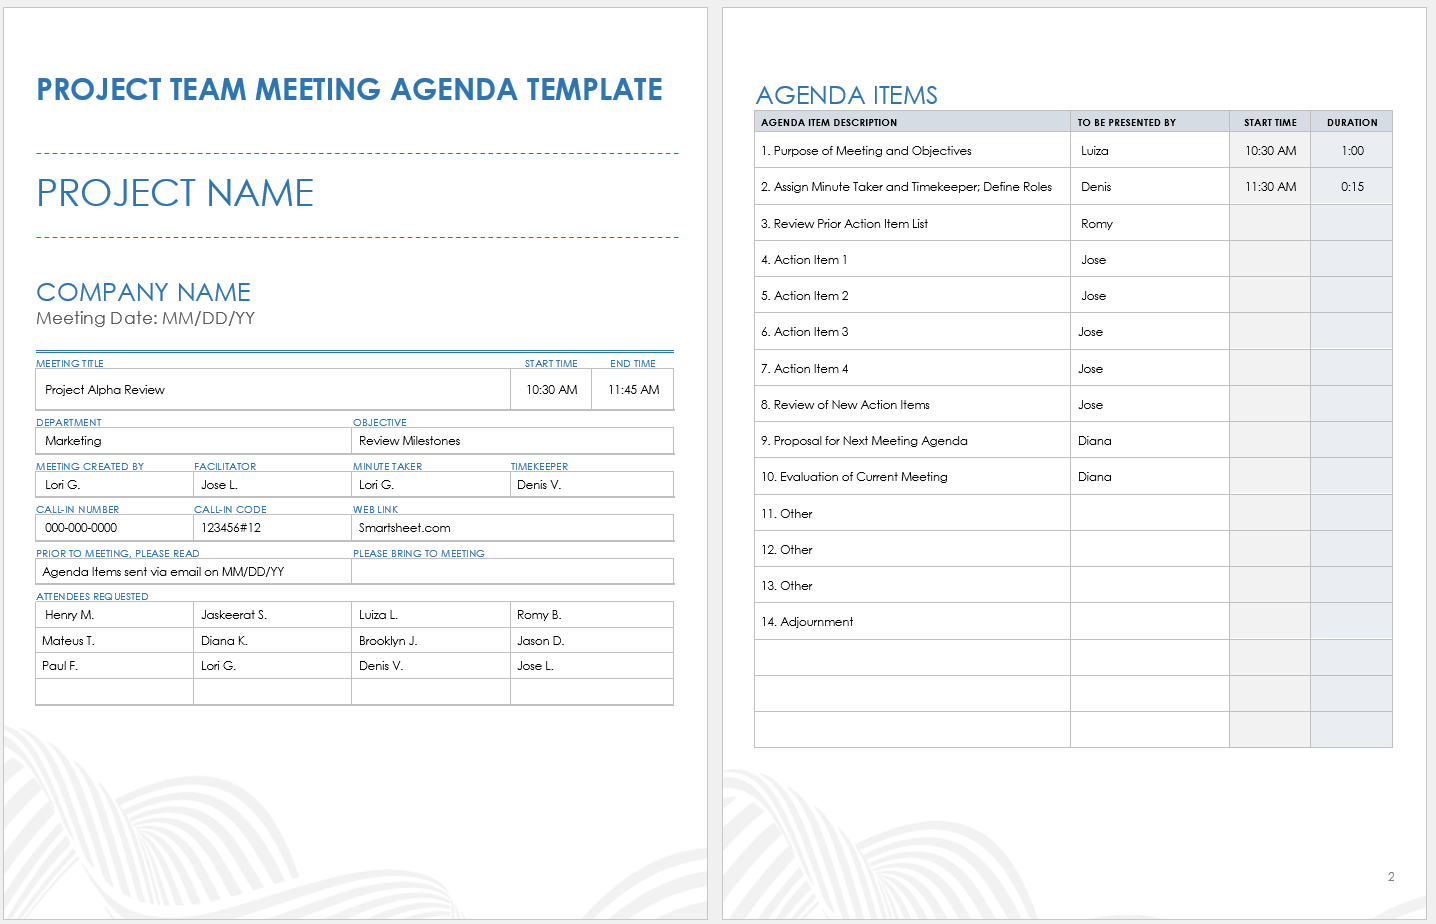 Project Team Meeting Agenda Template